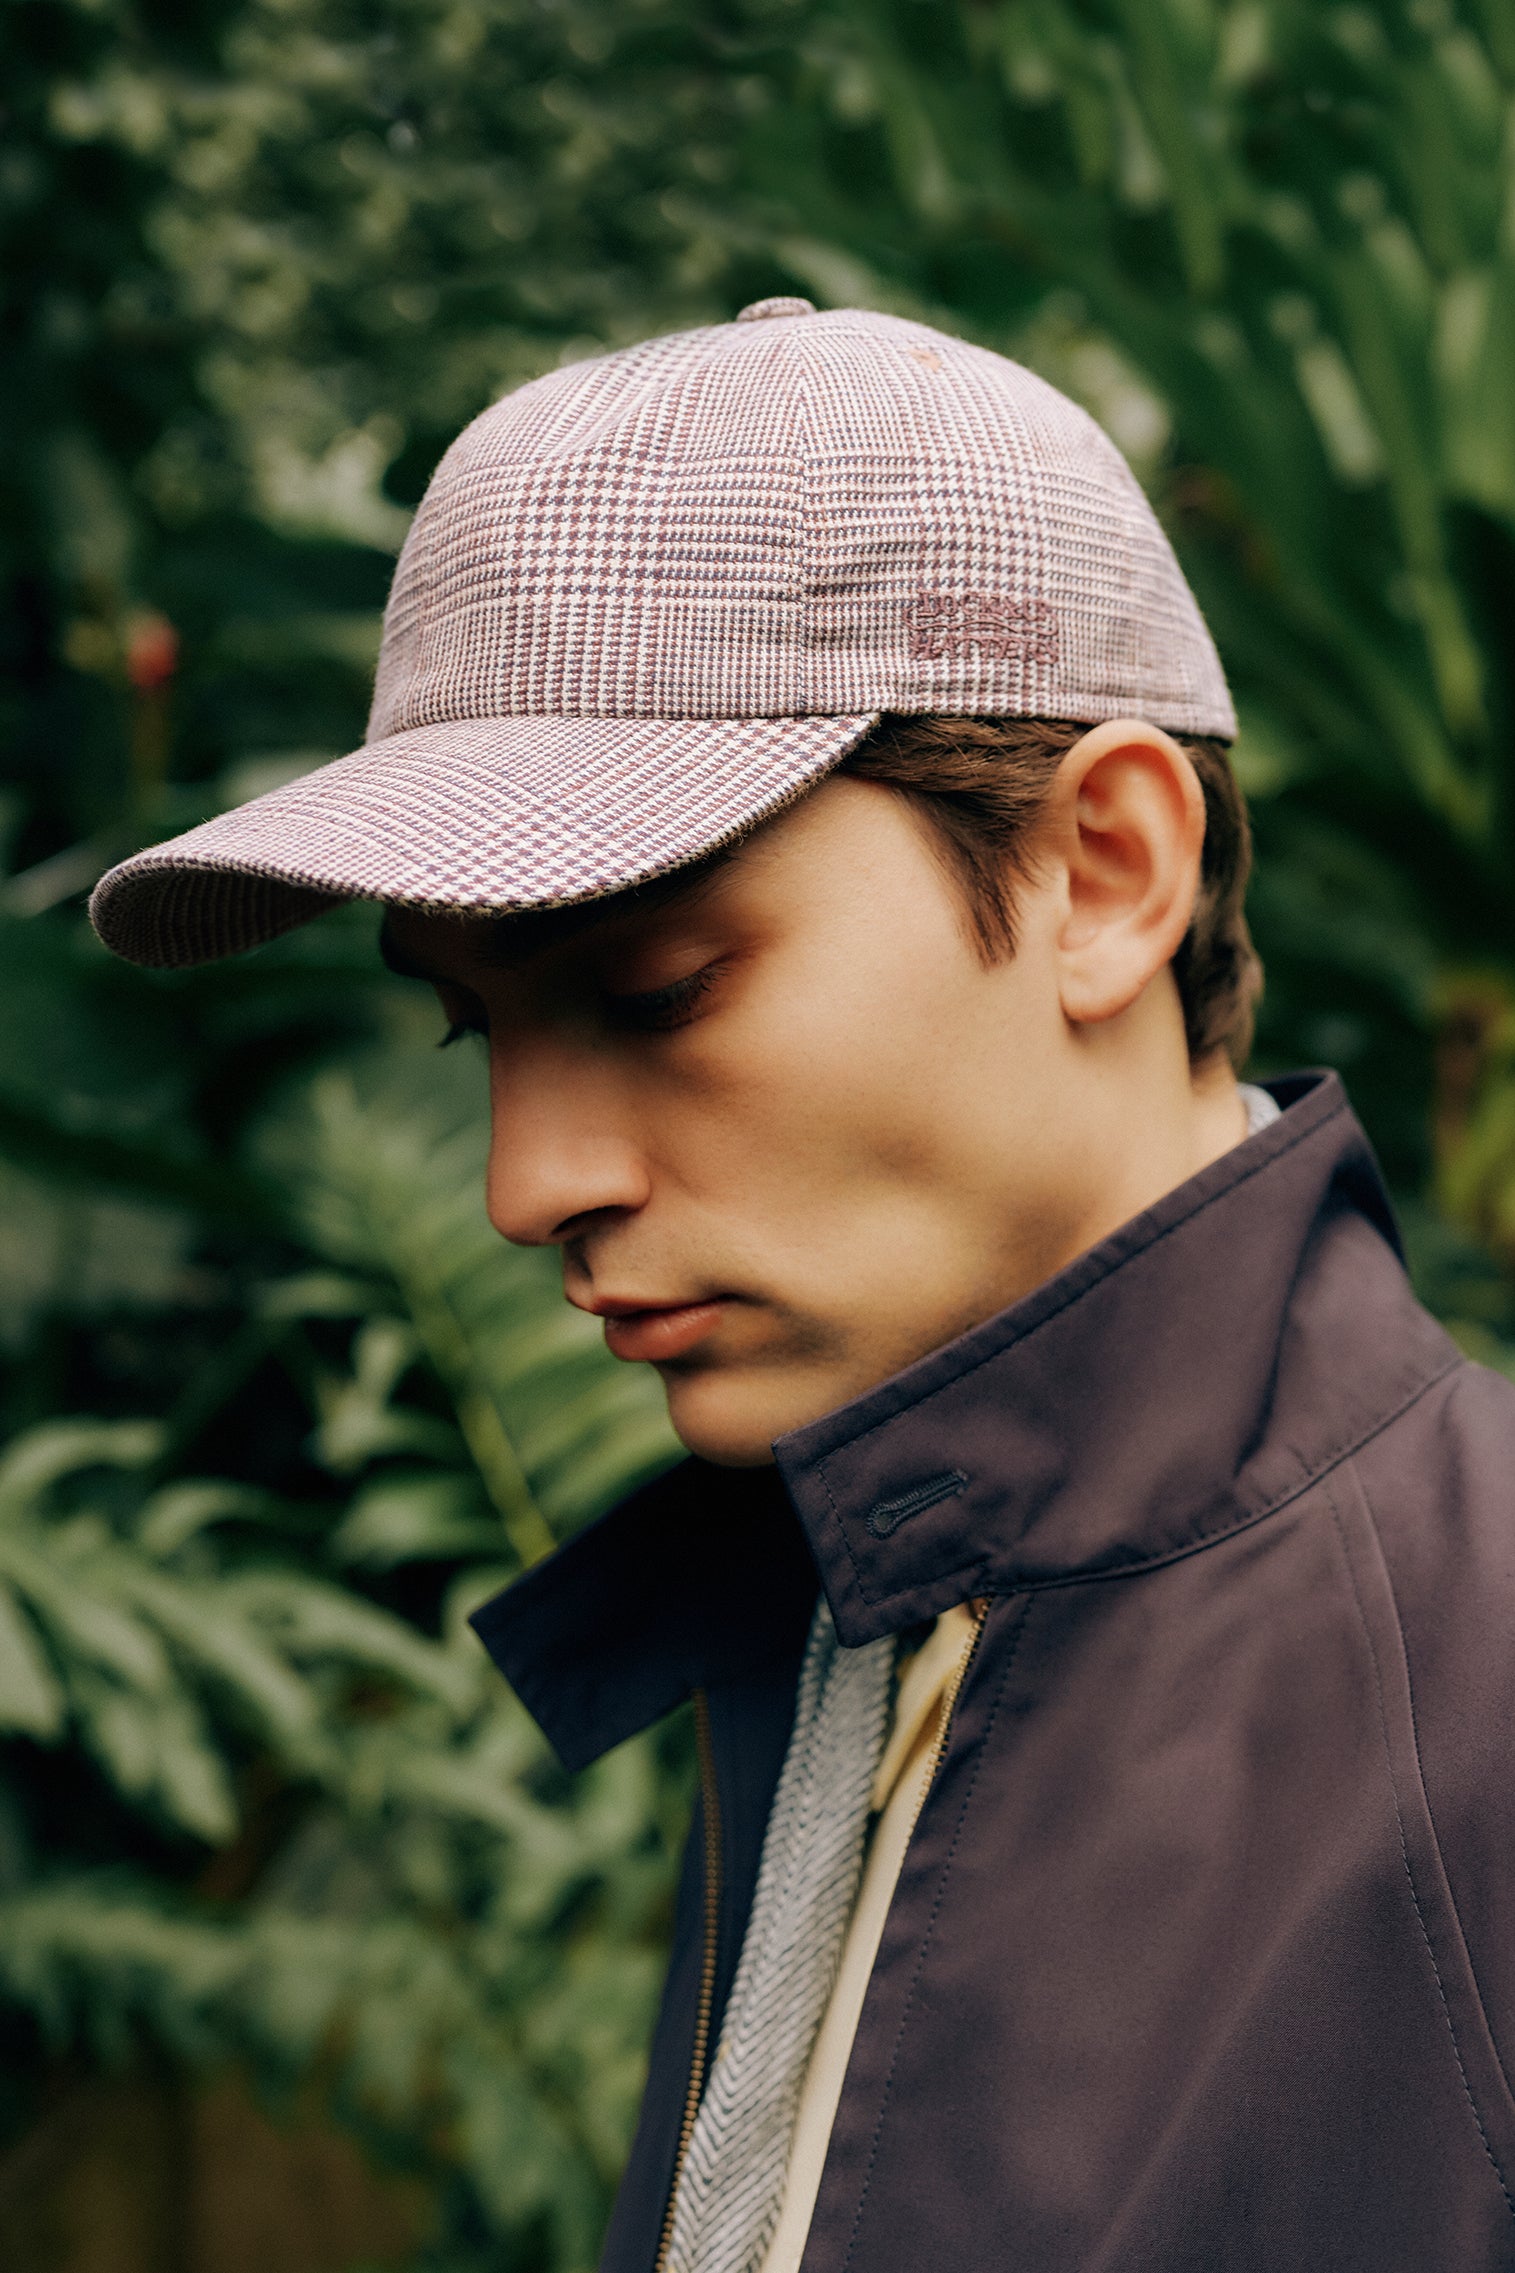 Adjustable Check Baseball Cap - Father's Day Gift Guide - Lock & Co. Hatters London UK